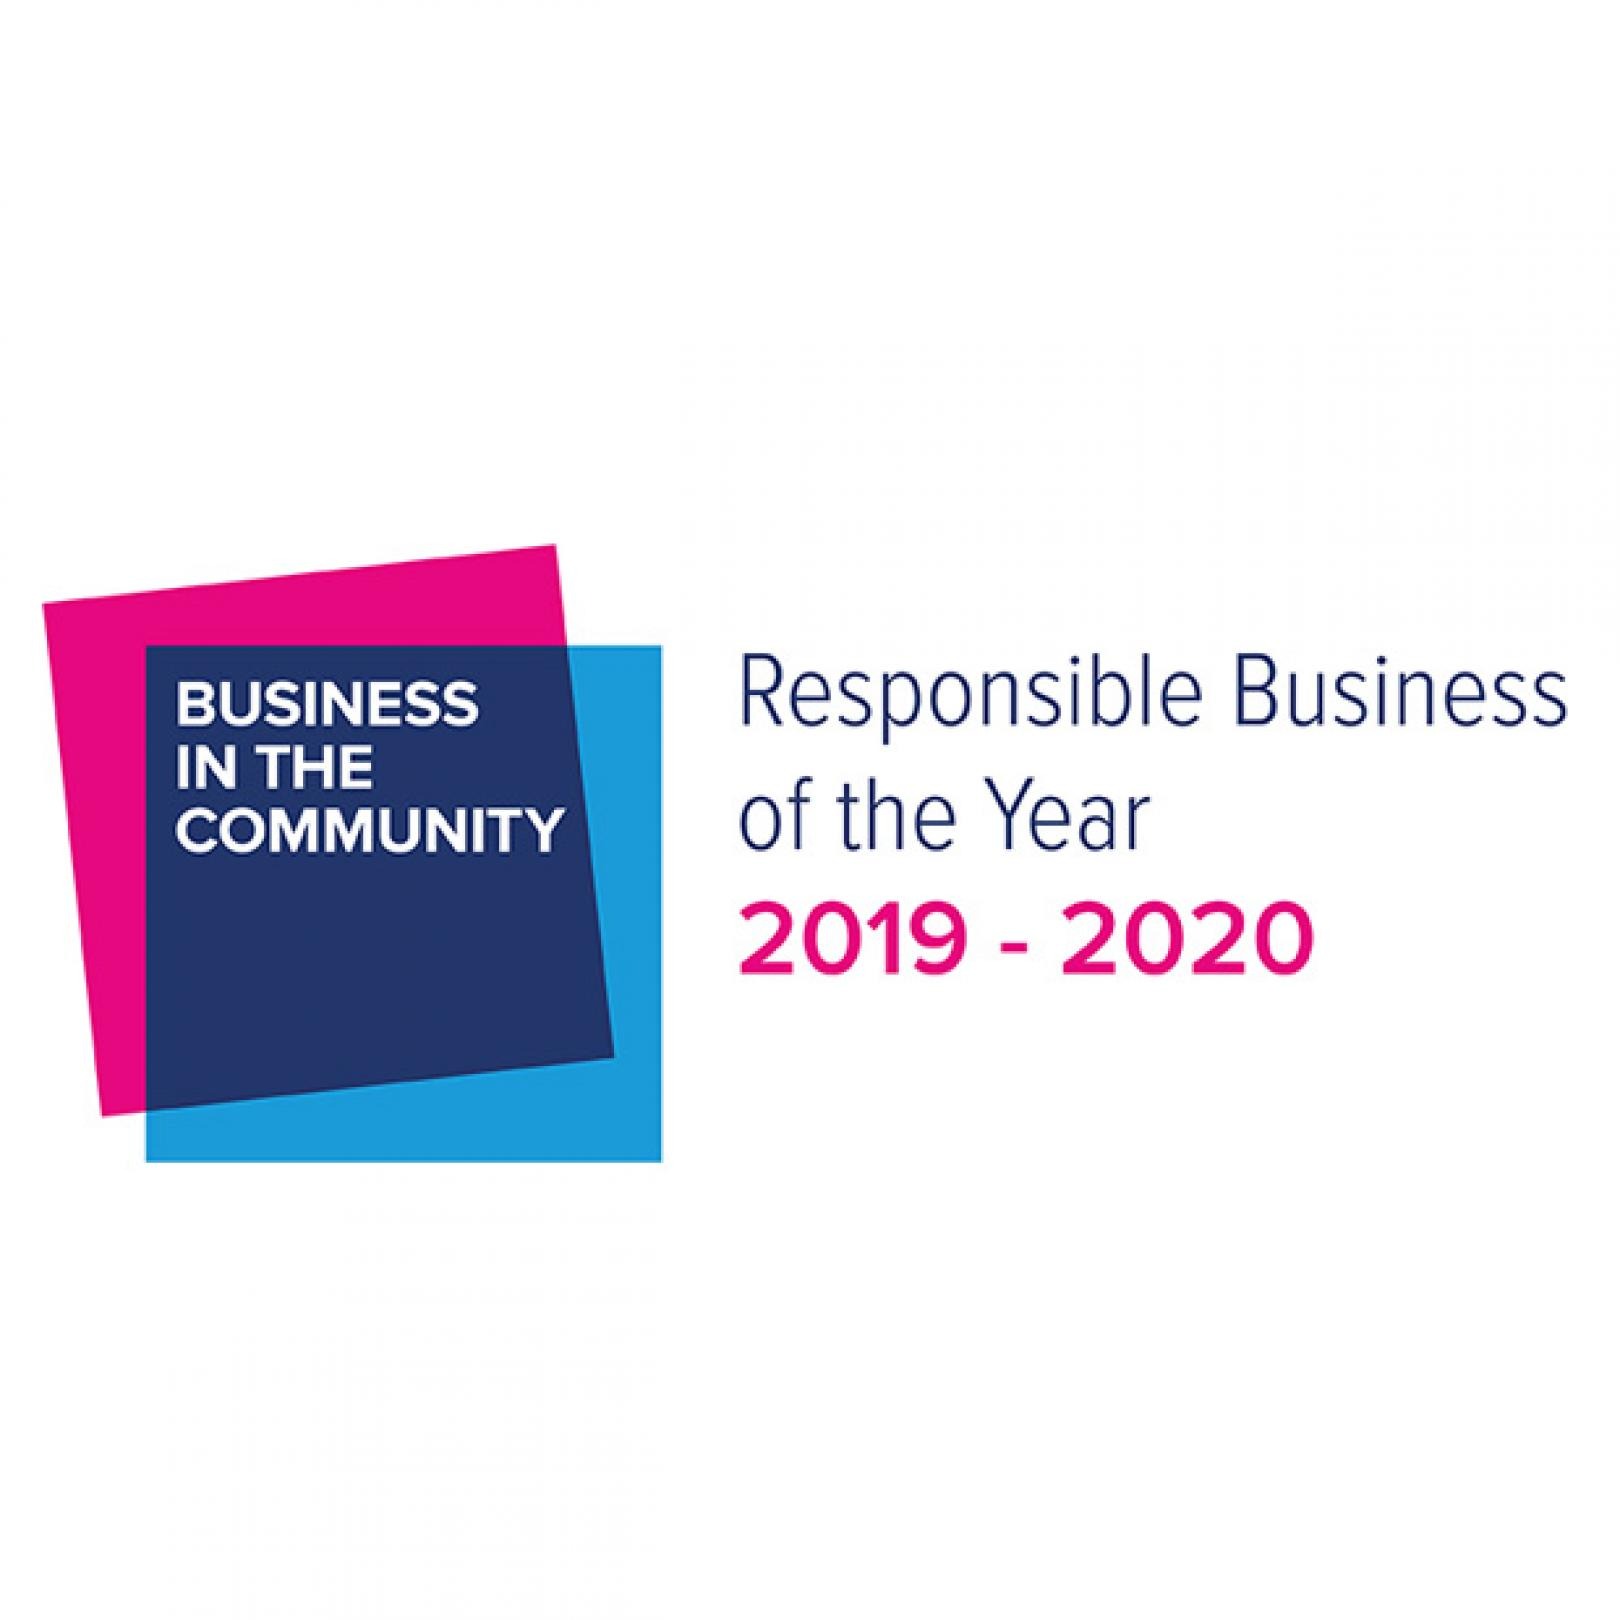 Responsible Business of the Year 2019-2020